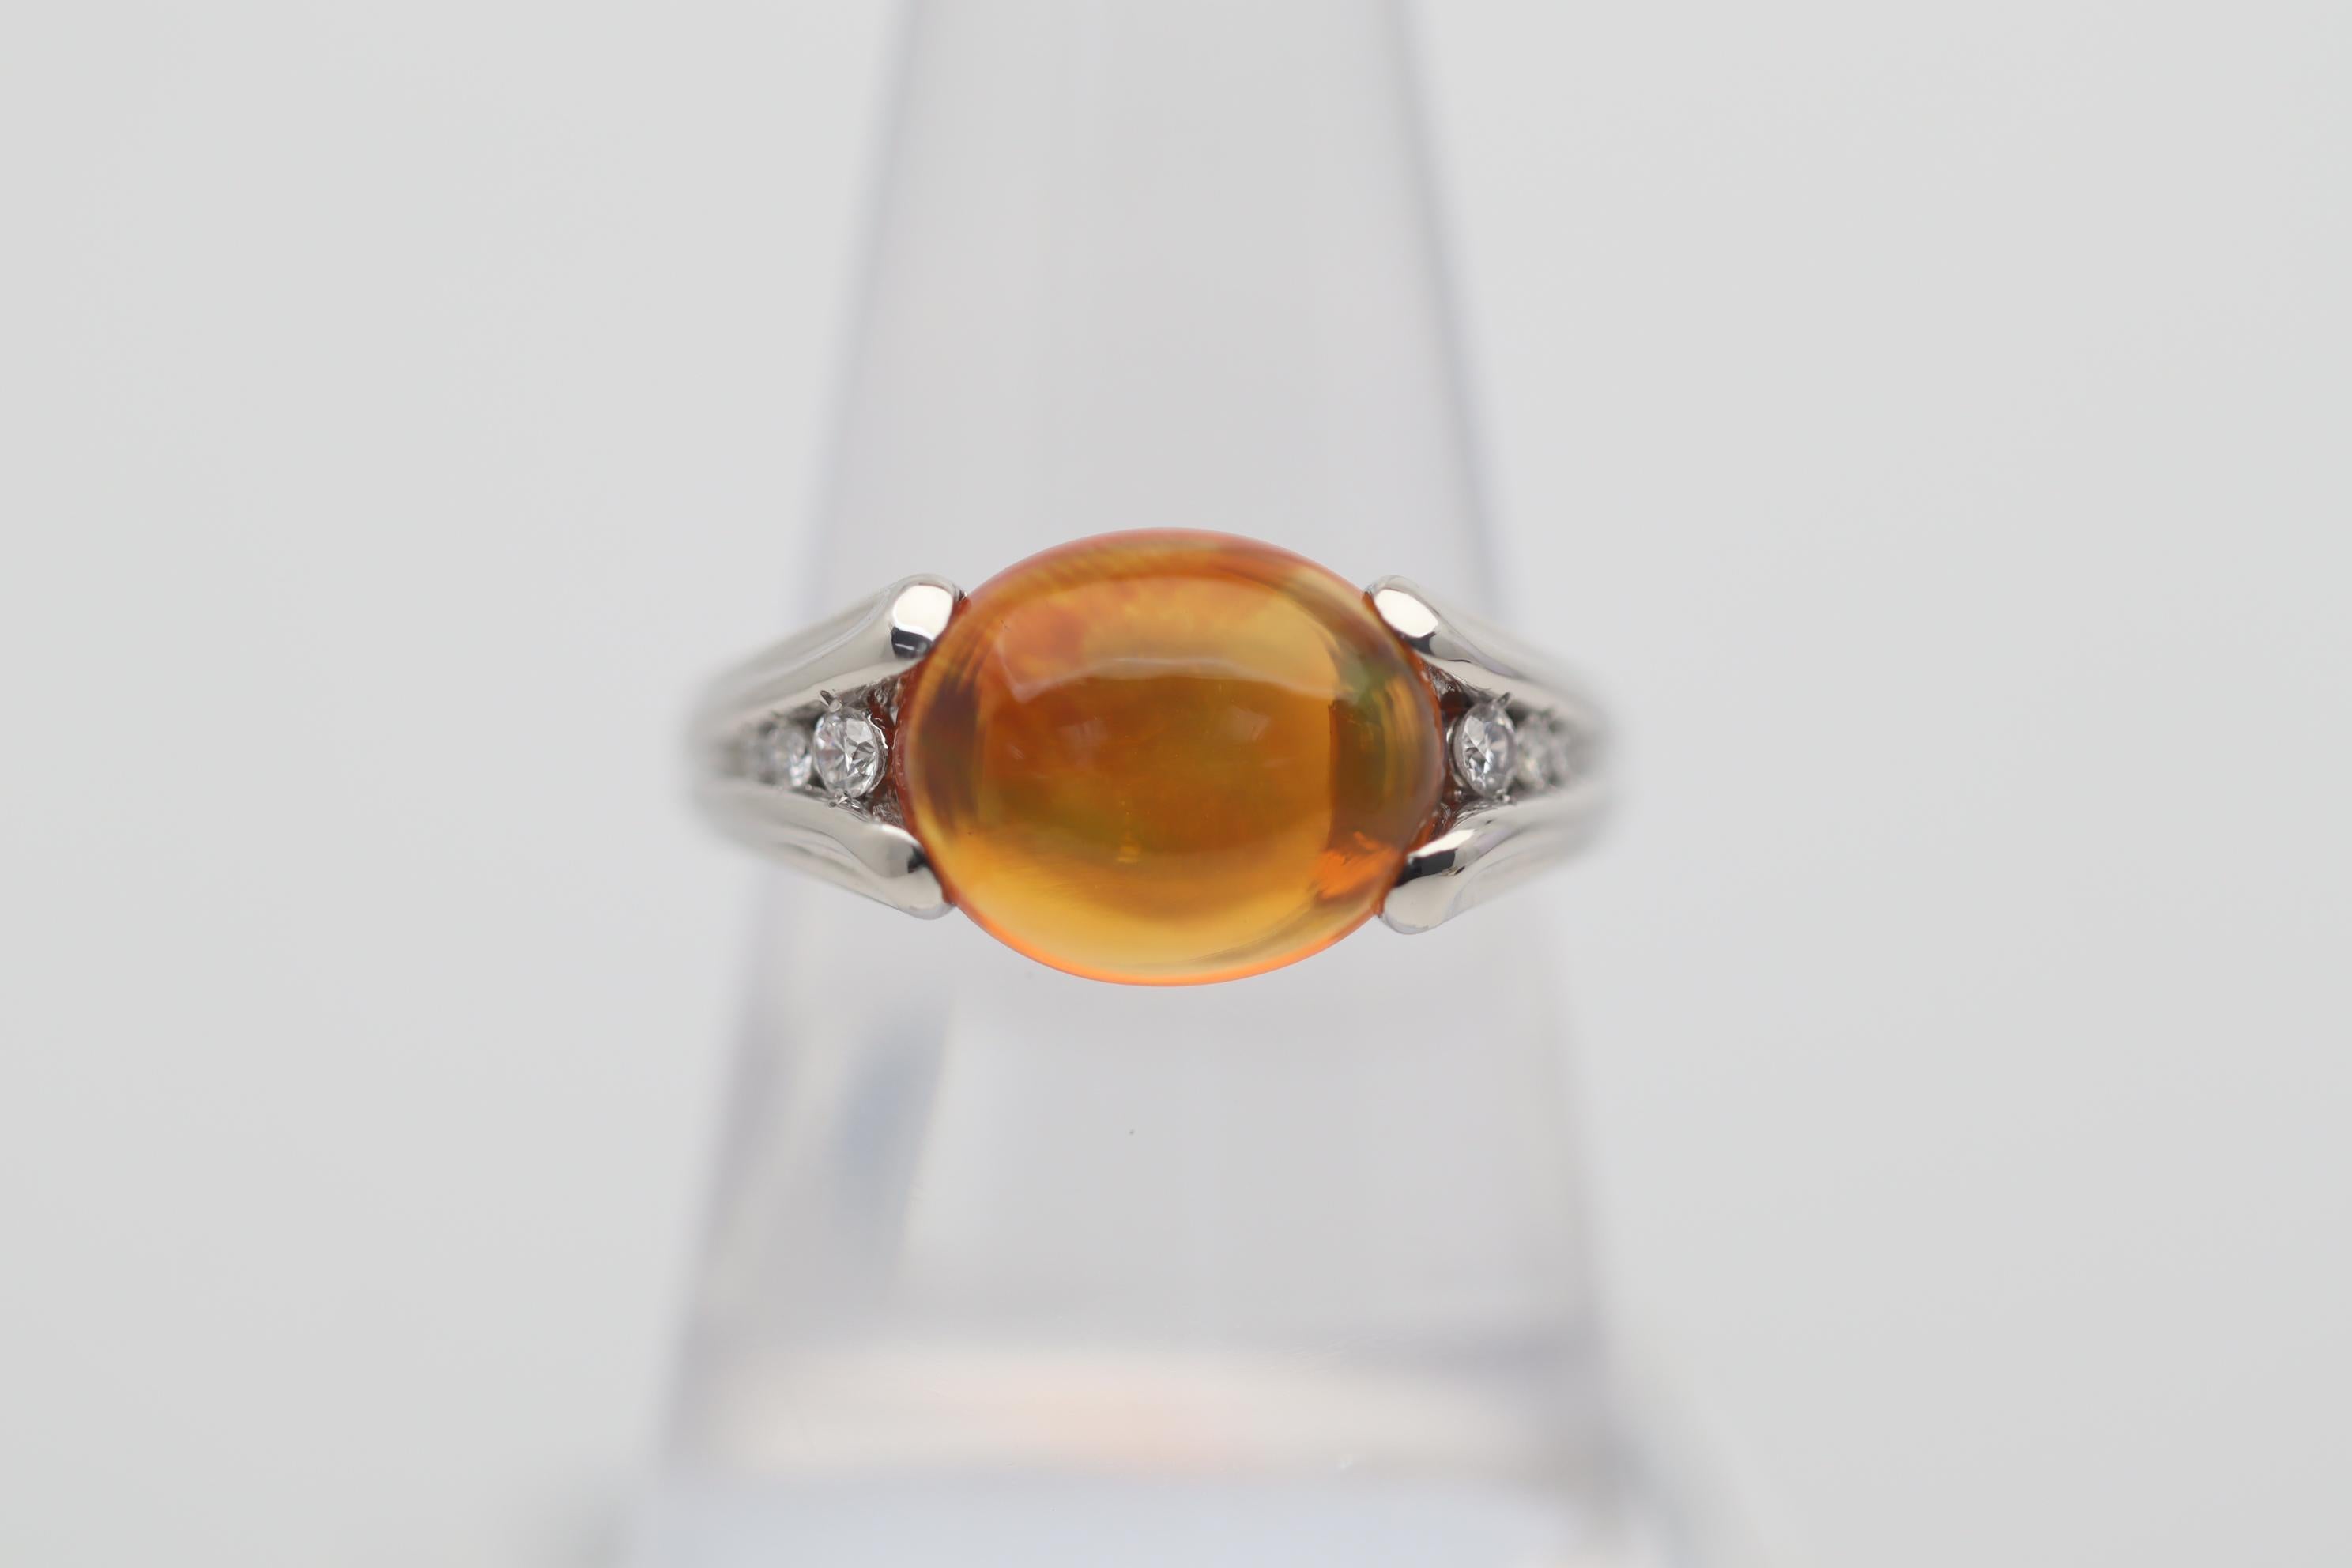 A sweet jelly fire opal from Mexico takes center stage of this platinum made ring. It weighs 3.26 carts and has a rich bright gem orange color along with strong play of color. Flashes of orange, red and green dance across the stone. It is accented